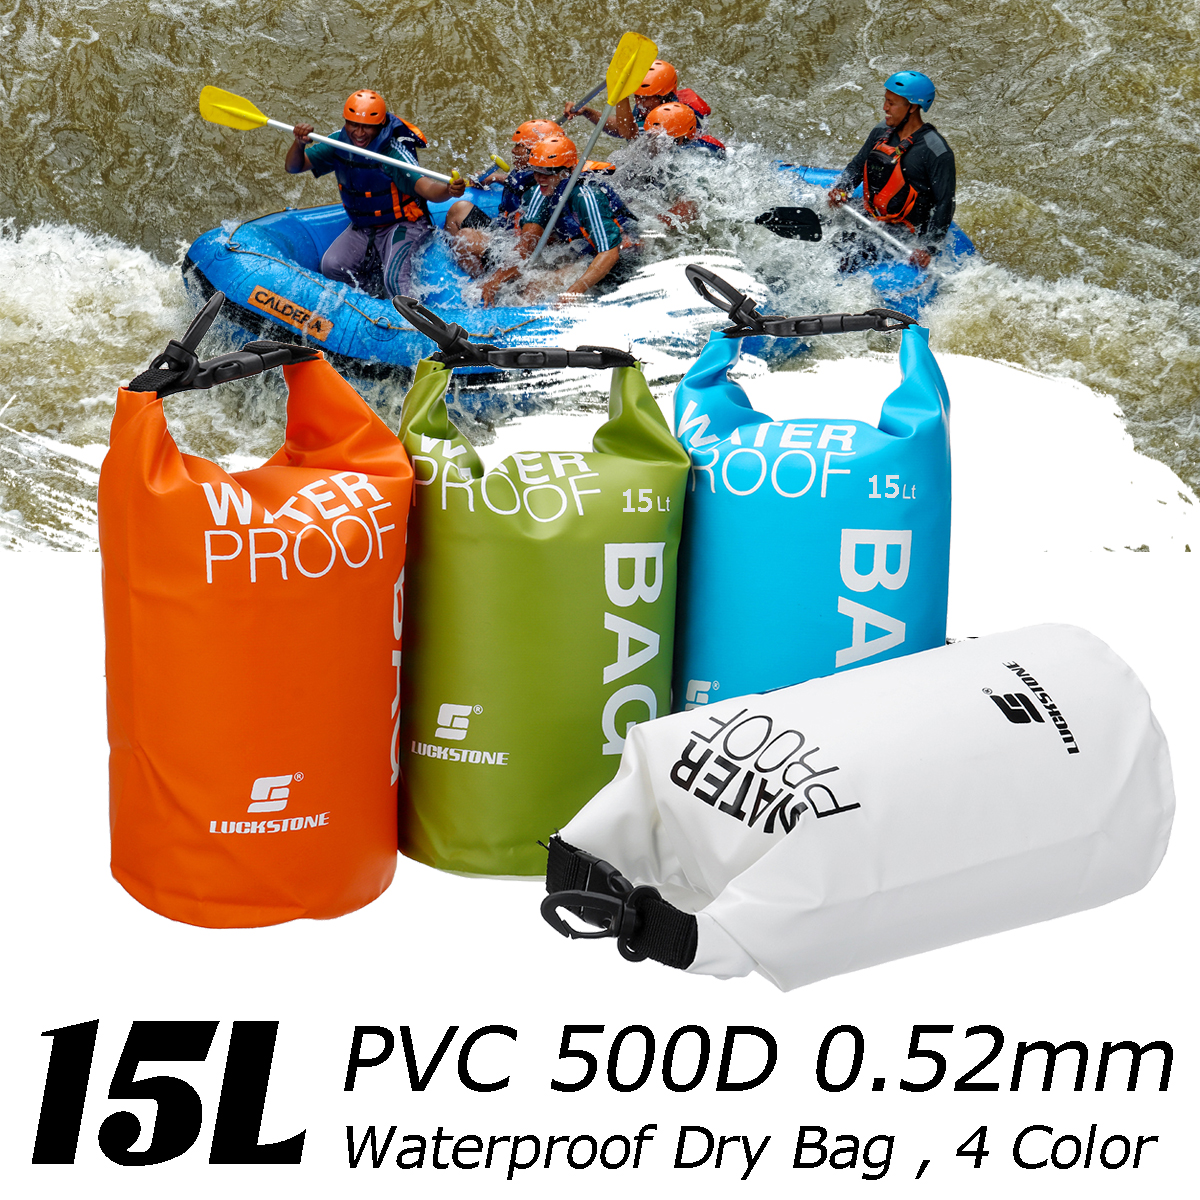 15L-Outdoor-Swimming-Air-Inflation-Floating-Mobile-Phone-Camera-Storage-PVC-Waterproof-Bag-1820816-1